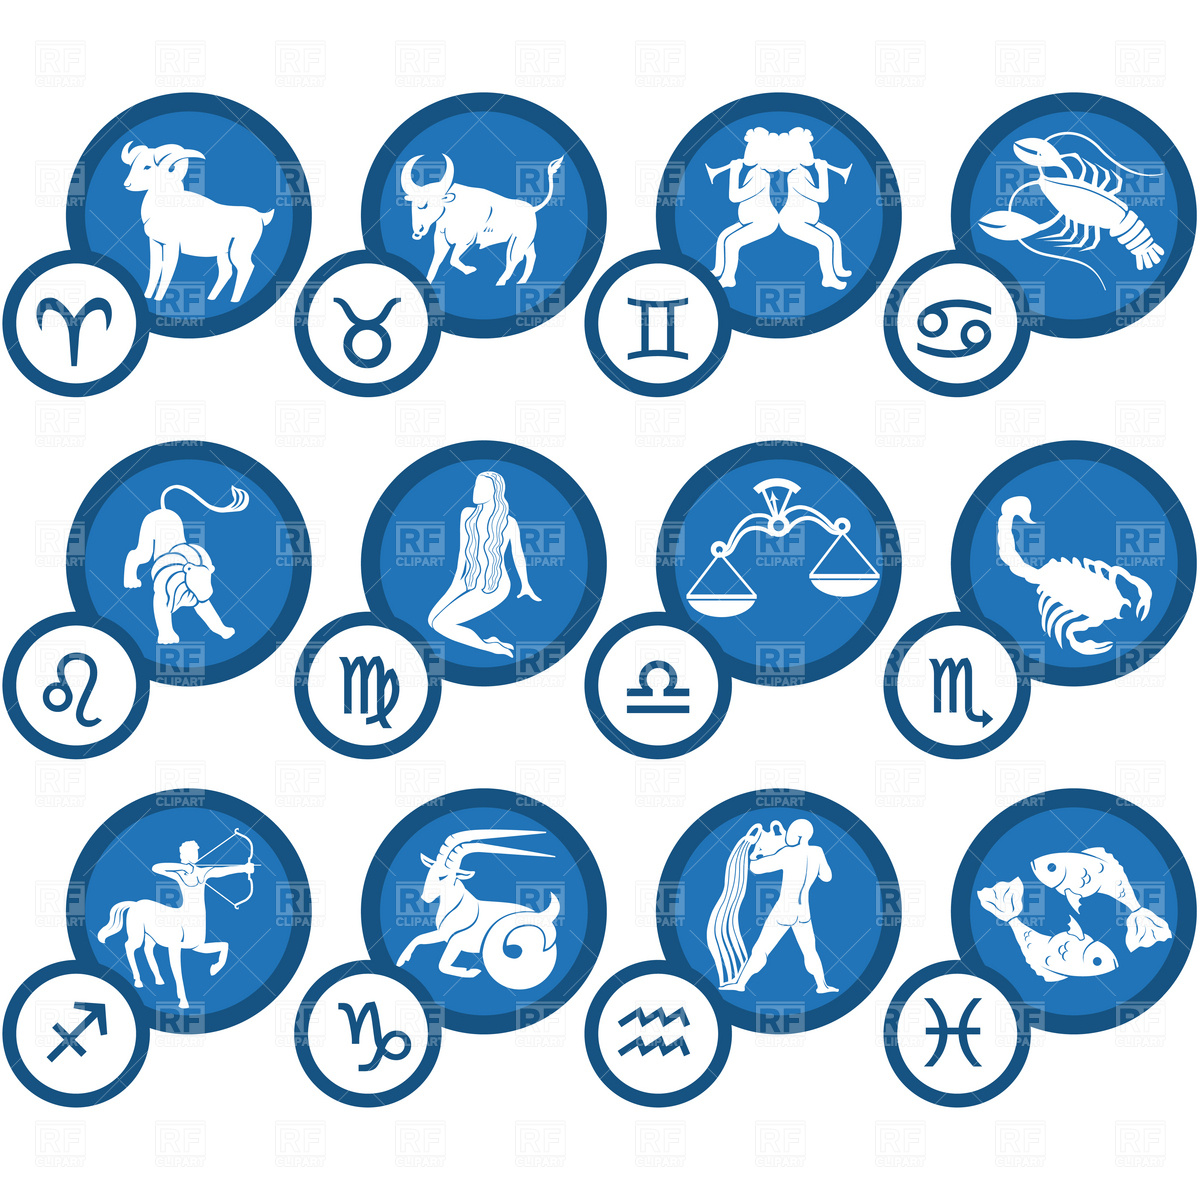 Zodiac Symbols And Signs Royalty Free Vector Image - Reverasite